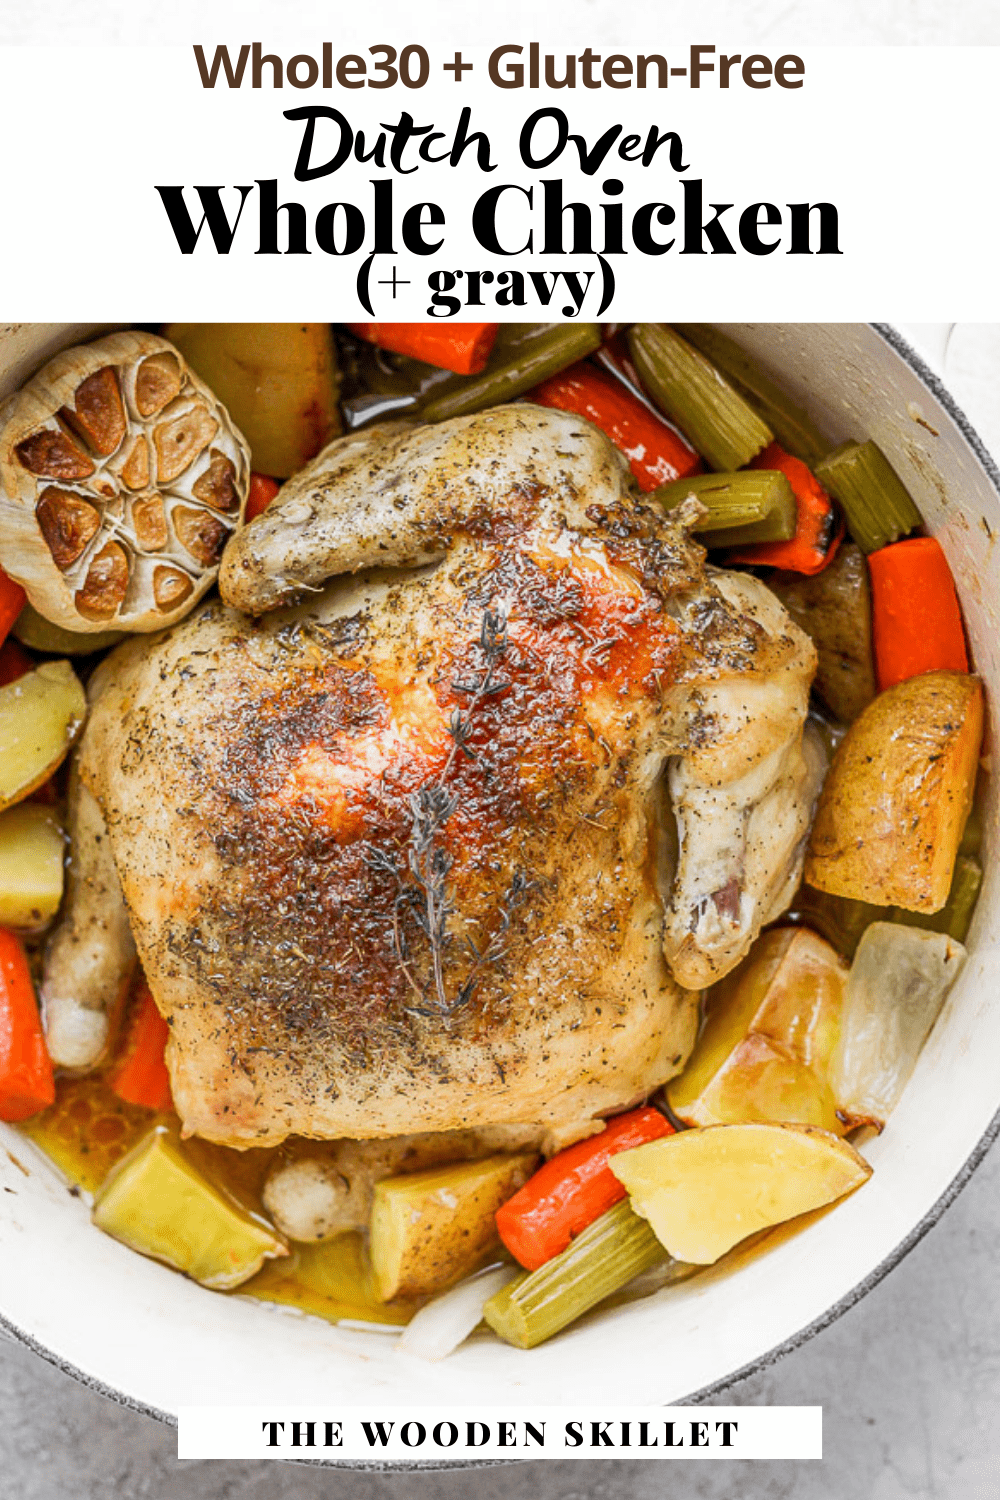 https://thewoodenskillet.com/wp-content/uploads/2020/09/dutch-oven-whole-chicken-recipe.png